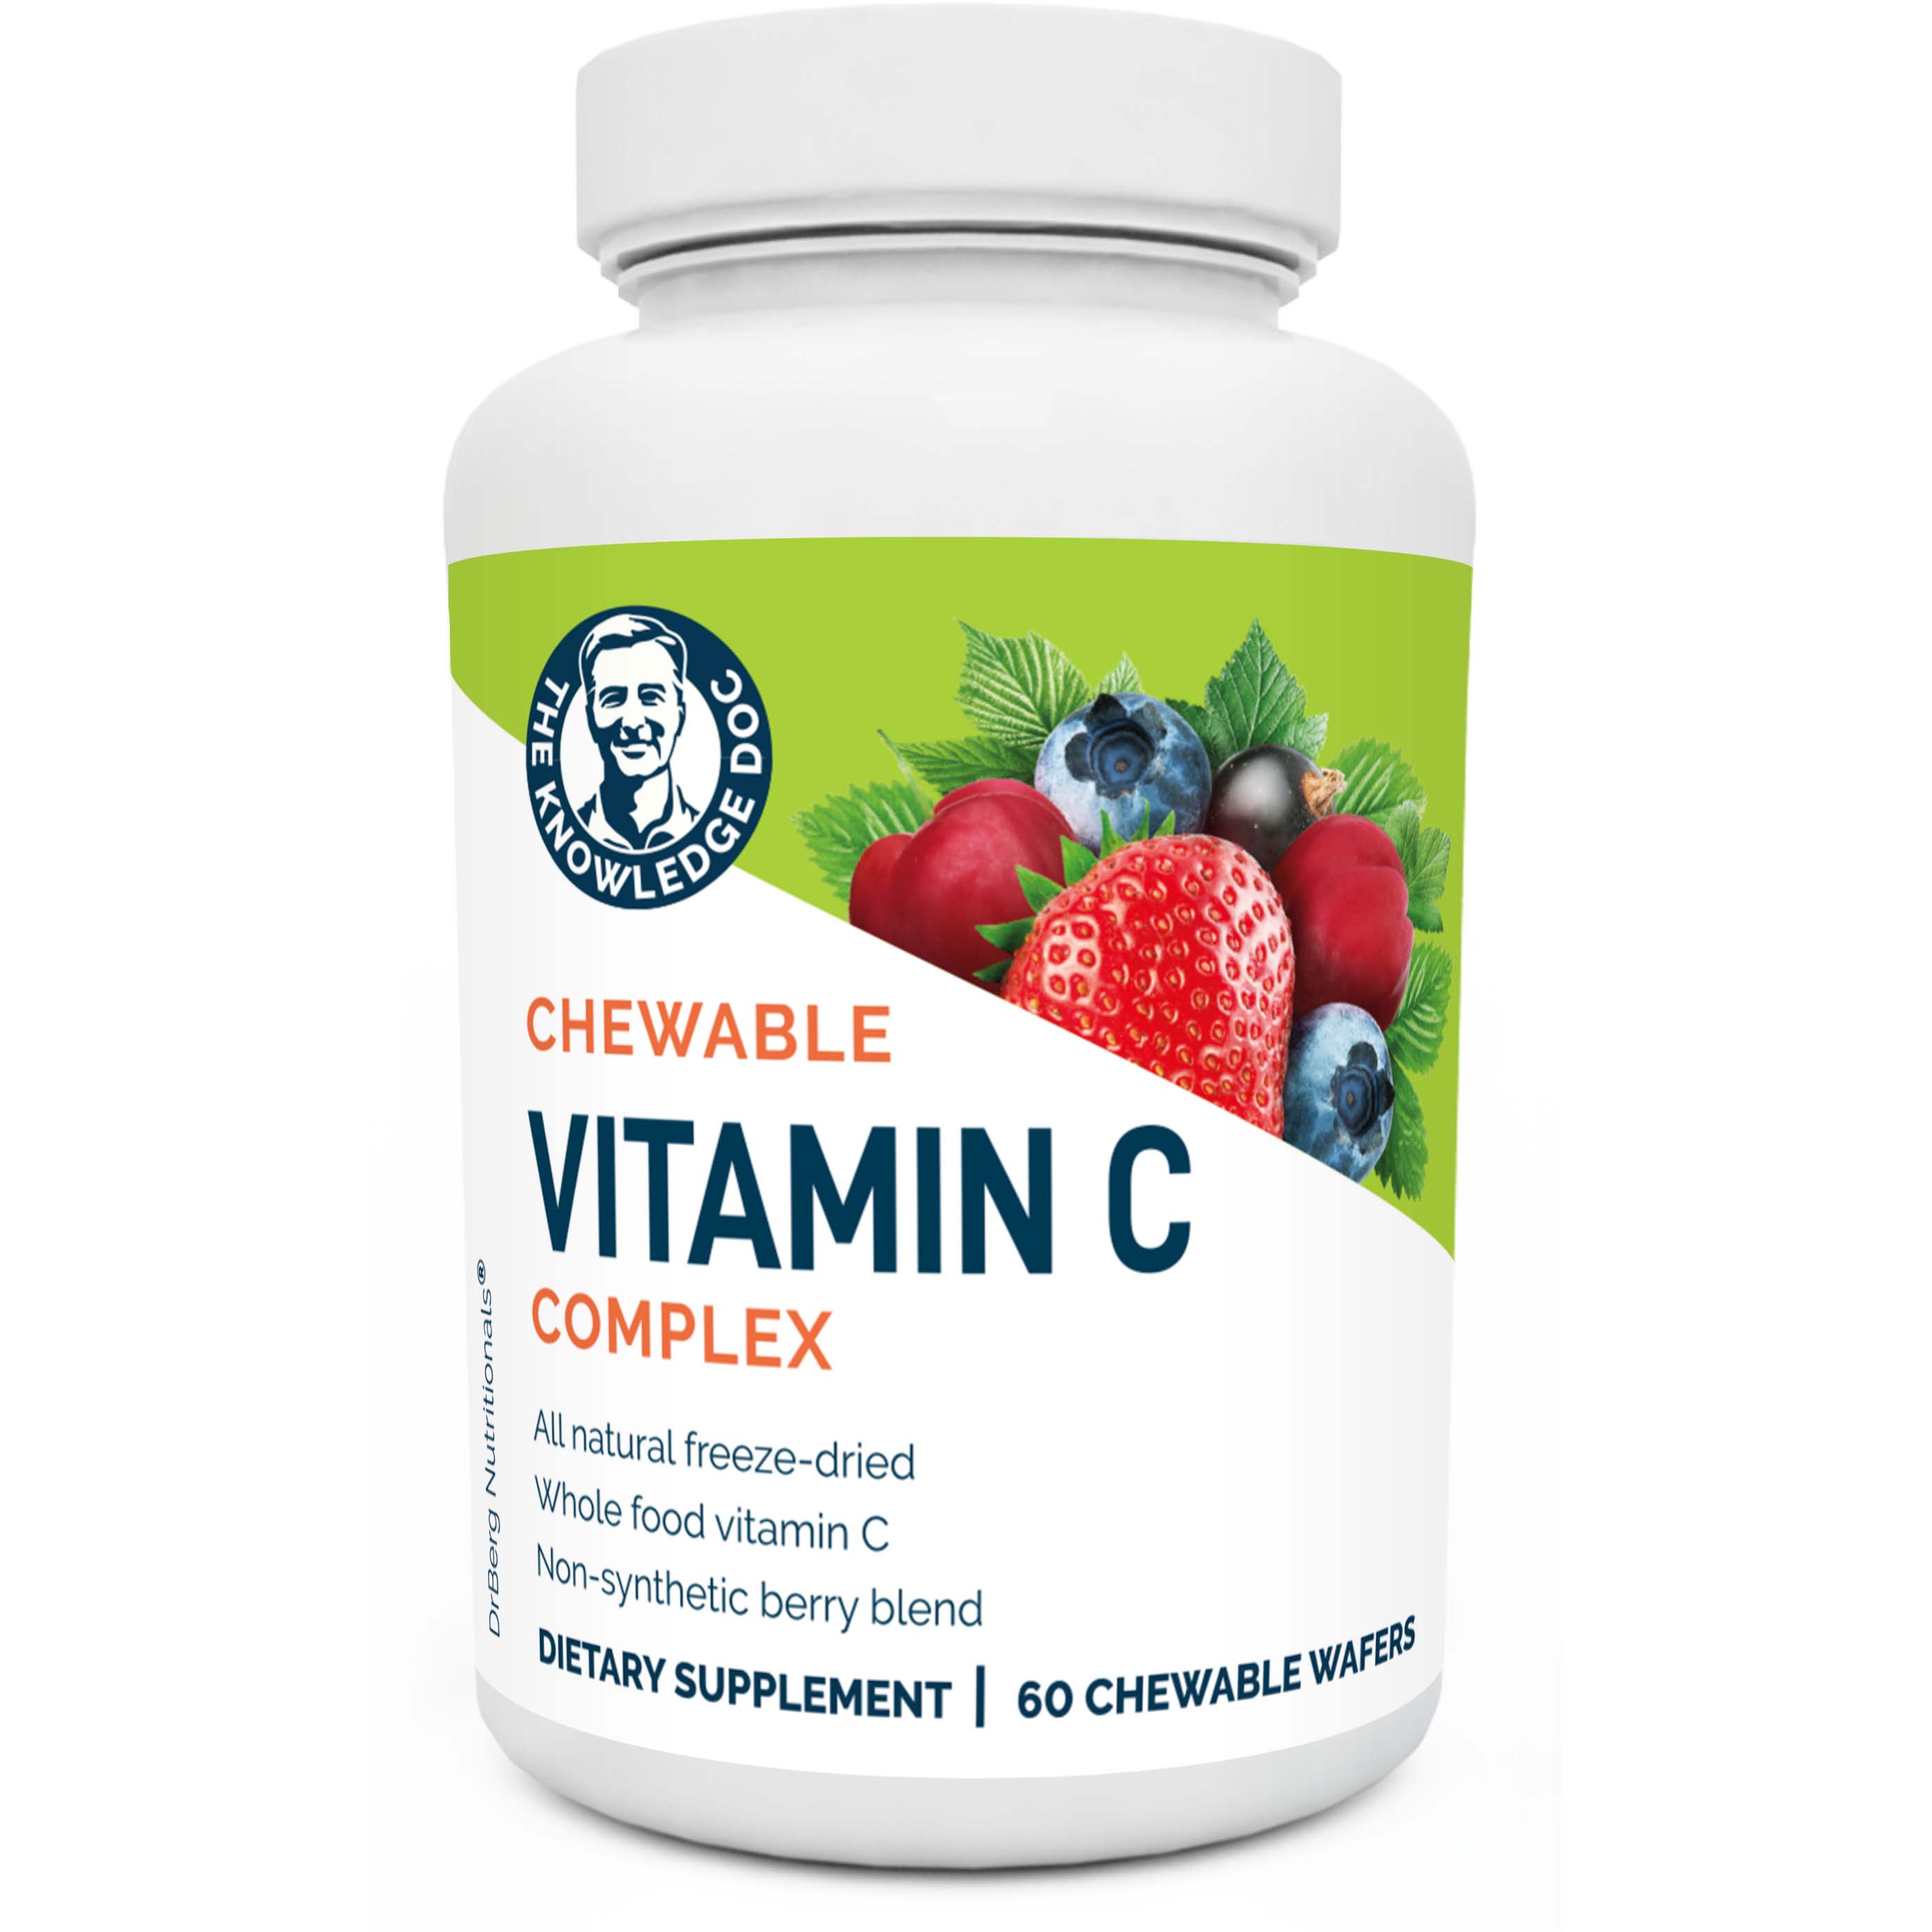 Dr.Berg Chewable Vitamin C Complex 60 Chewable Wafers